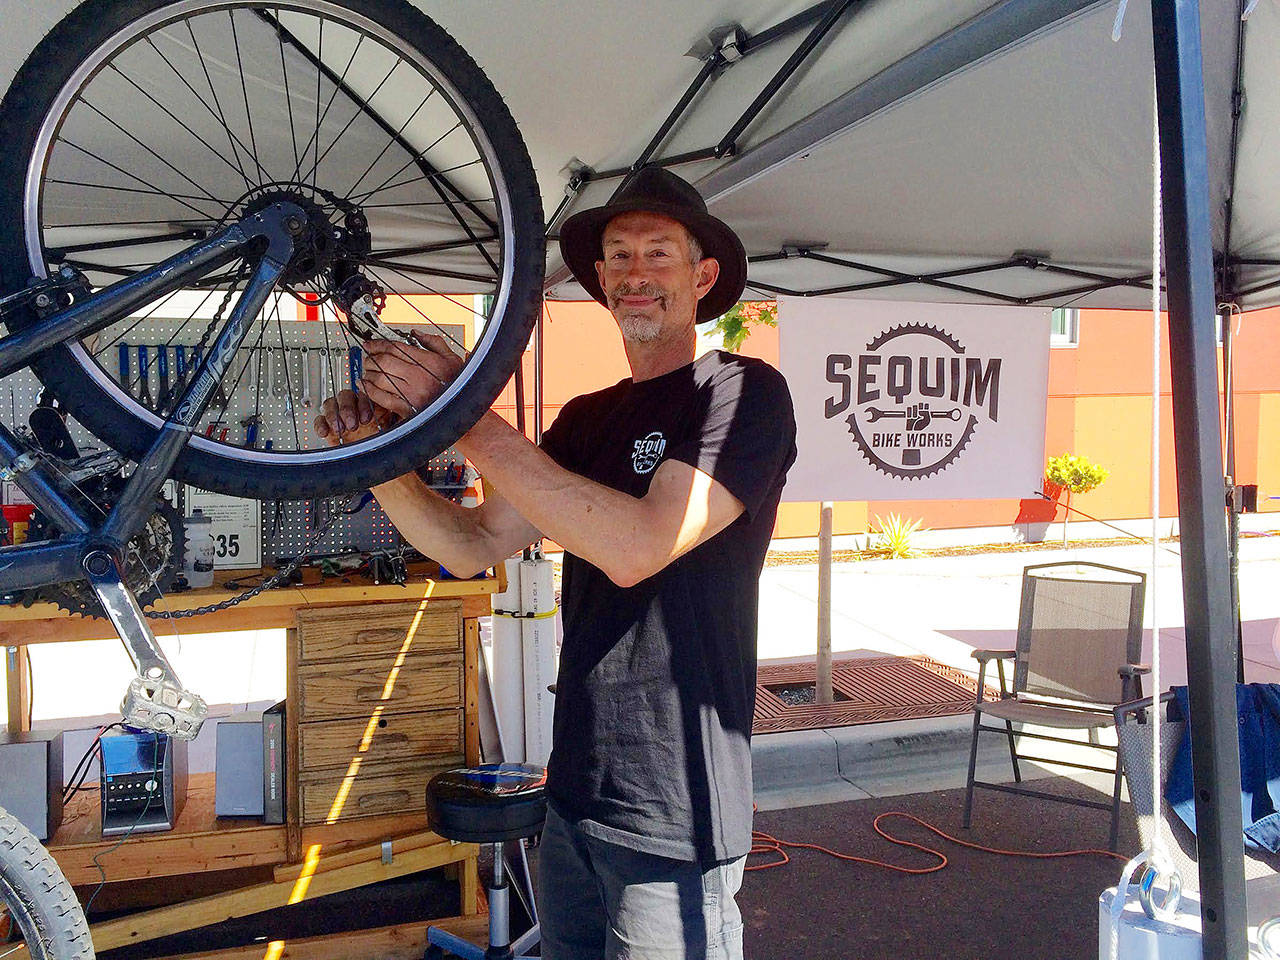 Sequim Bike Works comes to the market